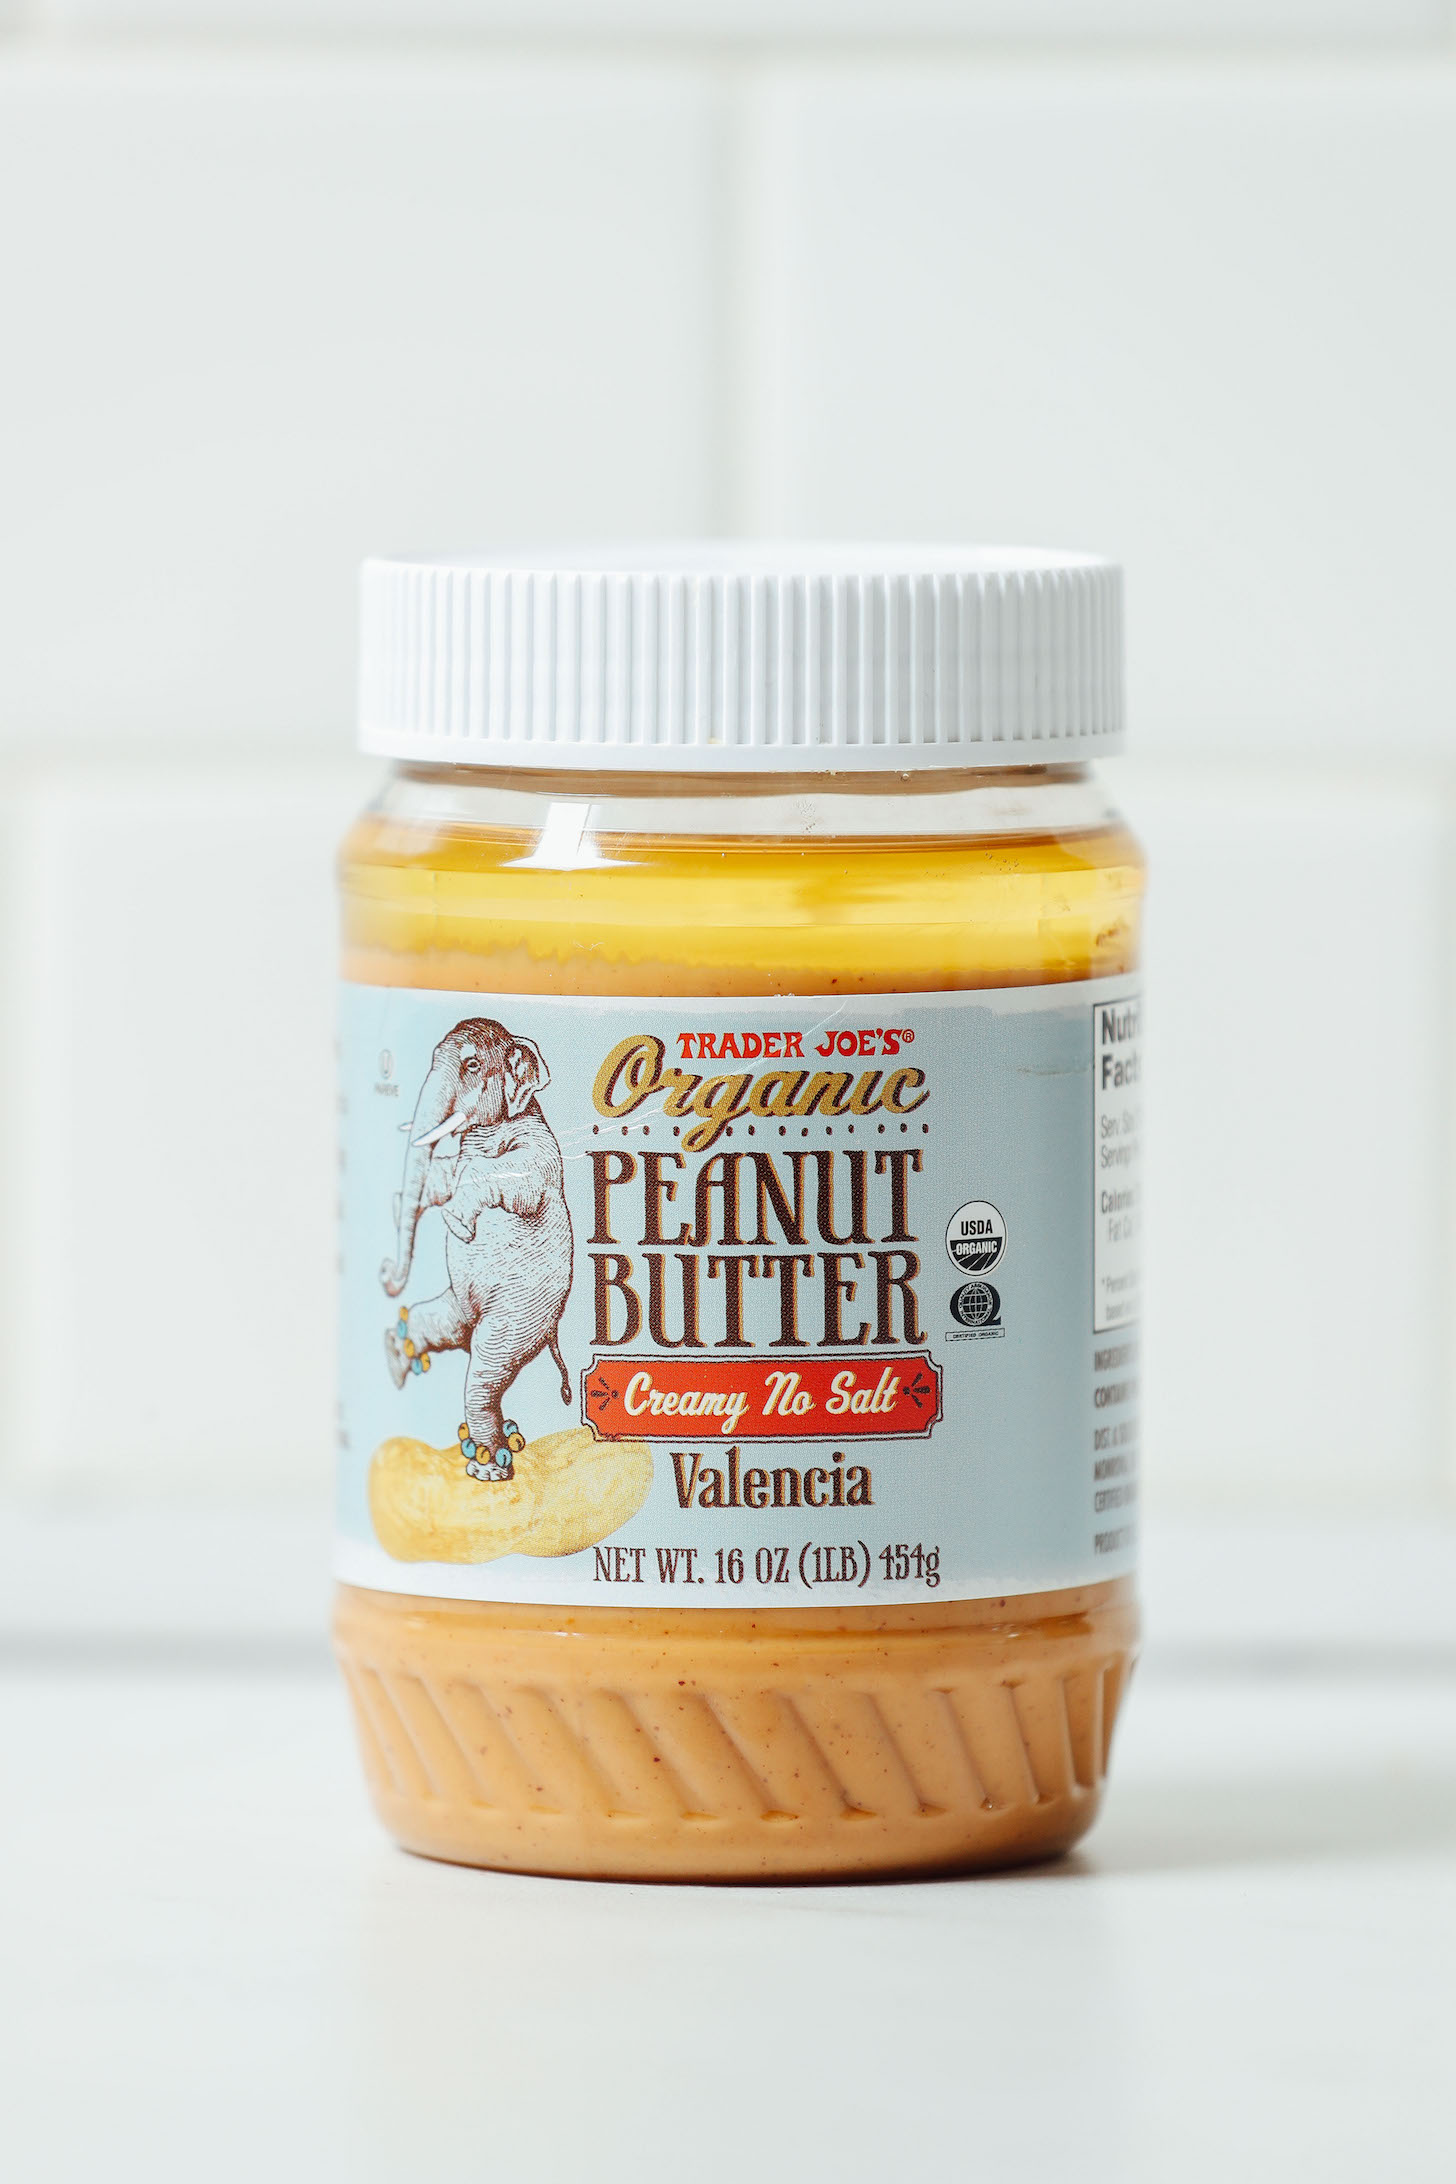 Jar of Trader Joe's Peanut Butter for our unsponsored review of peanut butters on the market